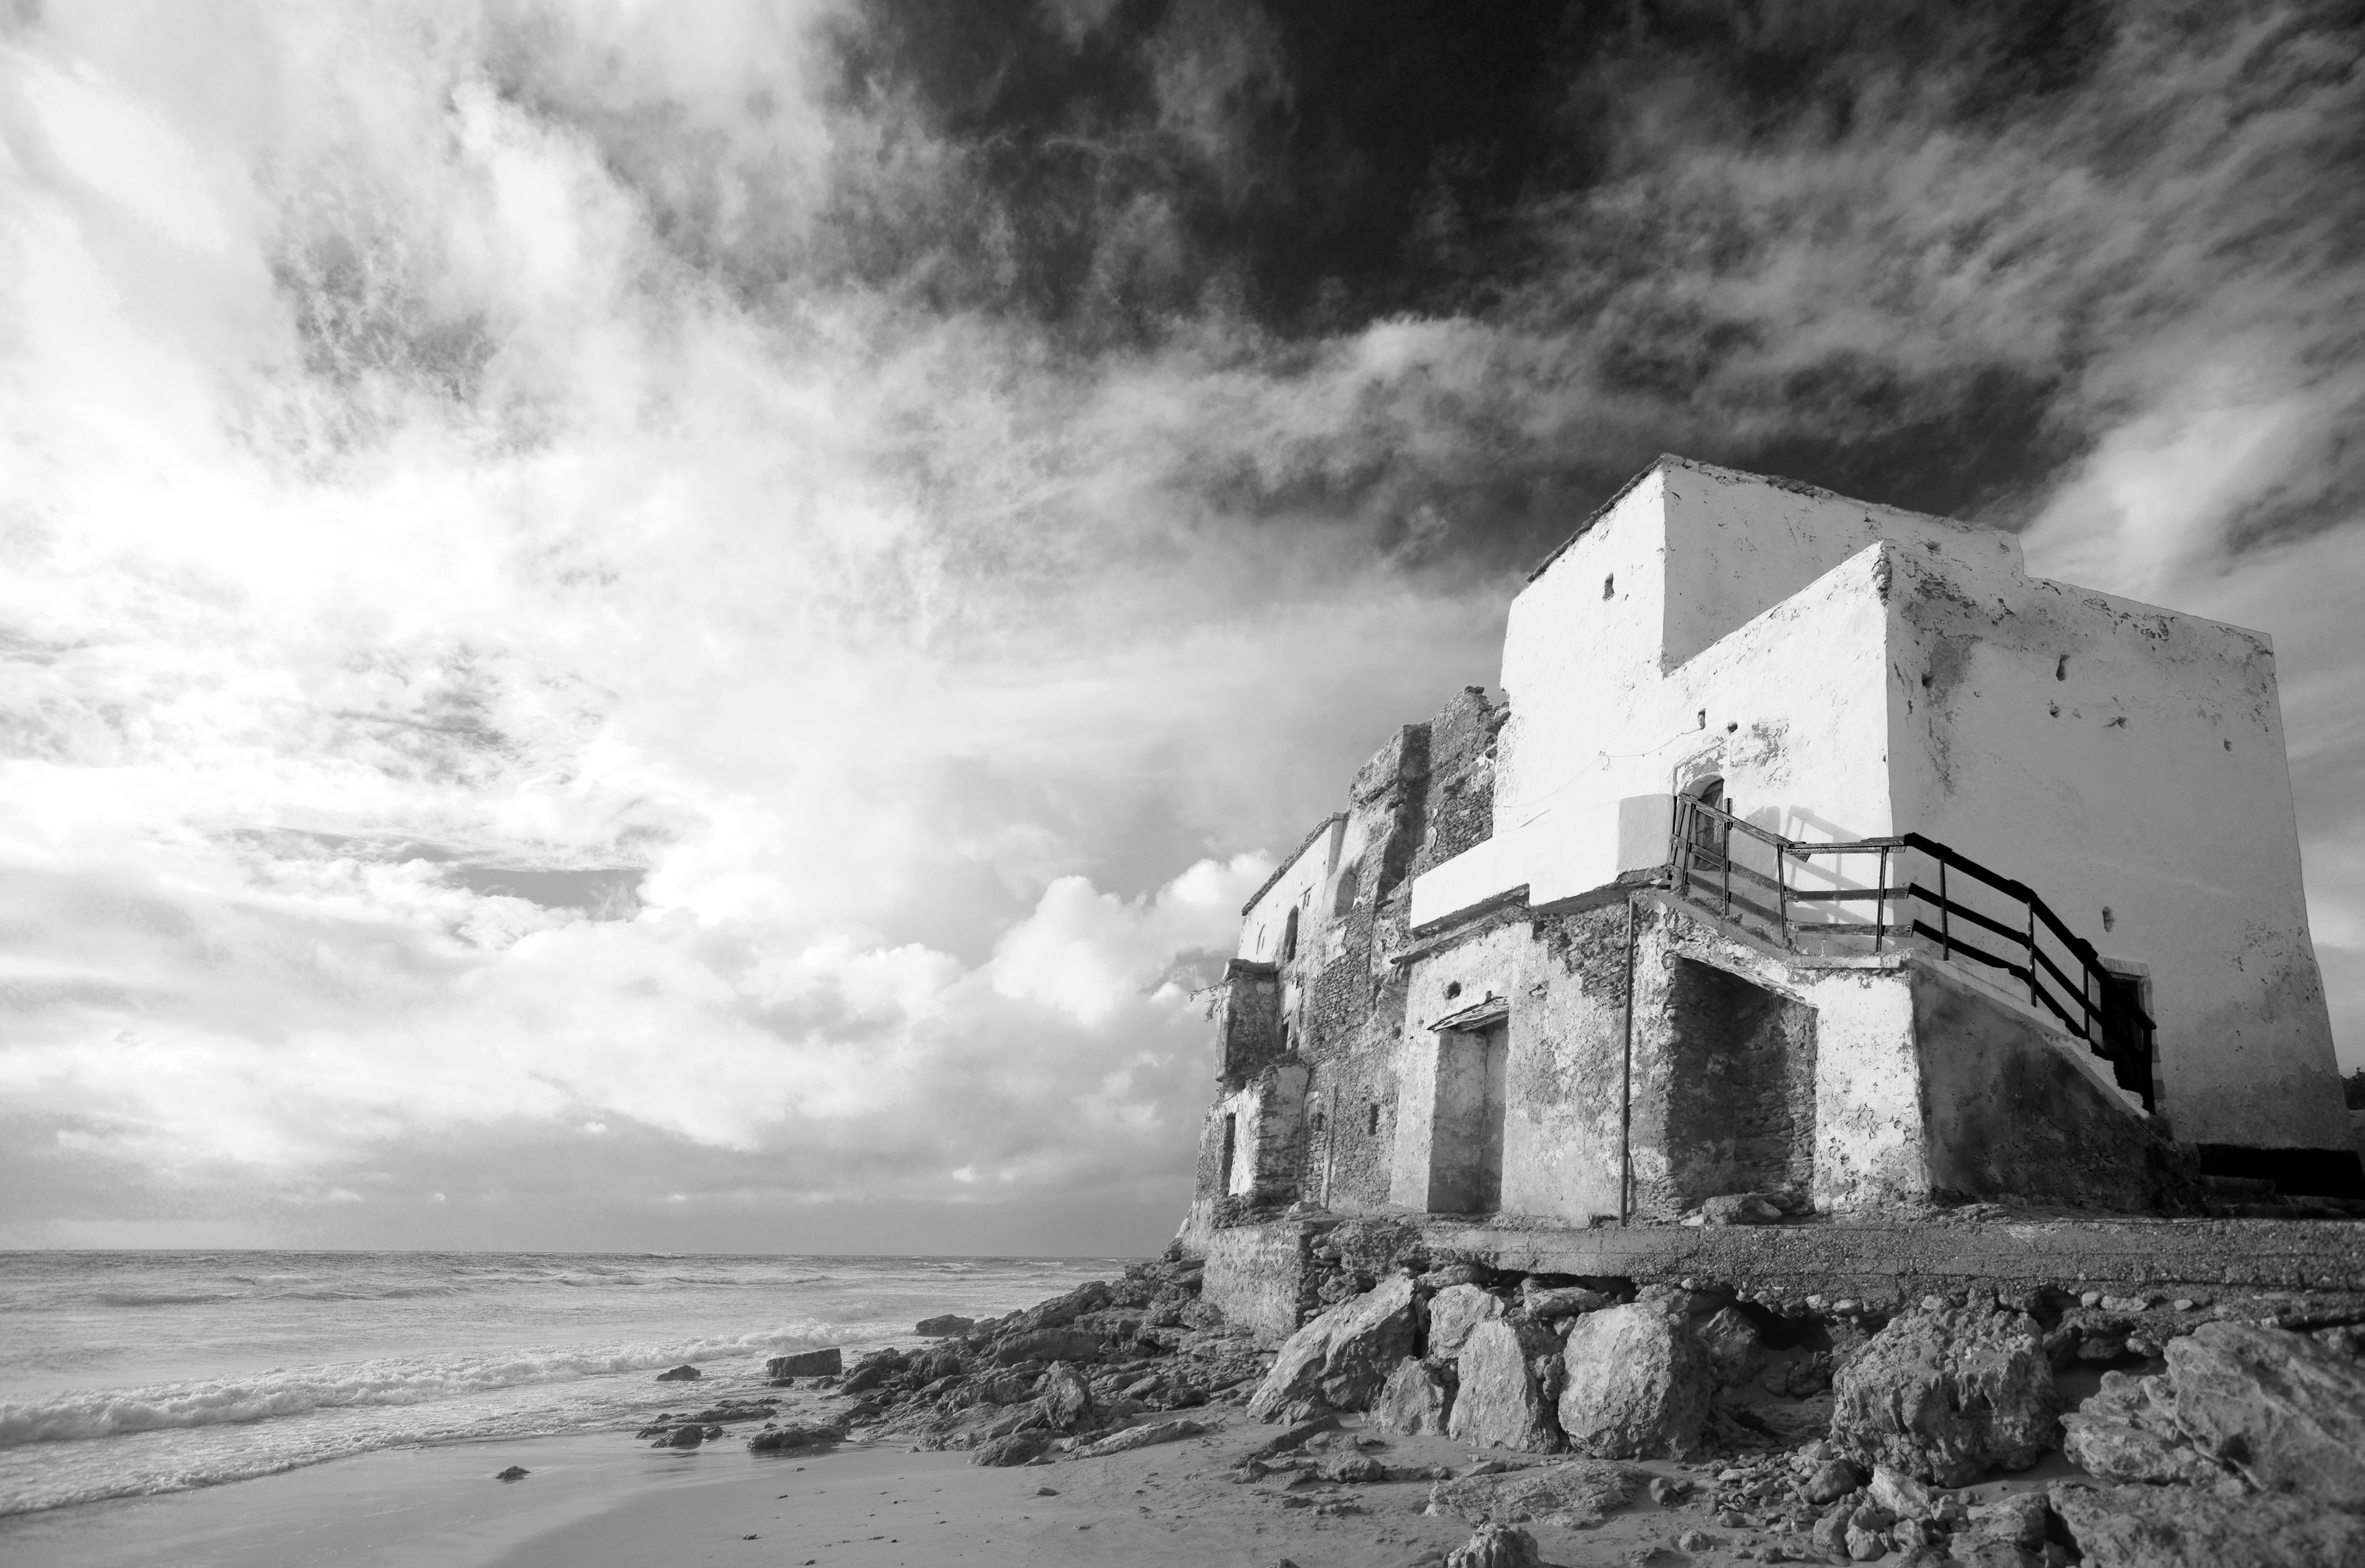 Nigel Barker Photography presents Beach Ruin in black and white